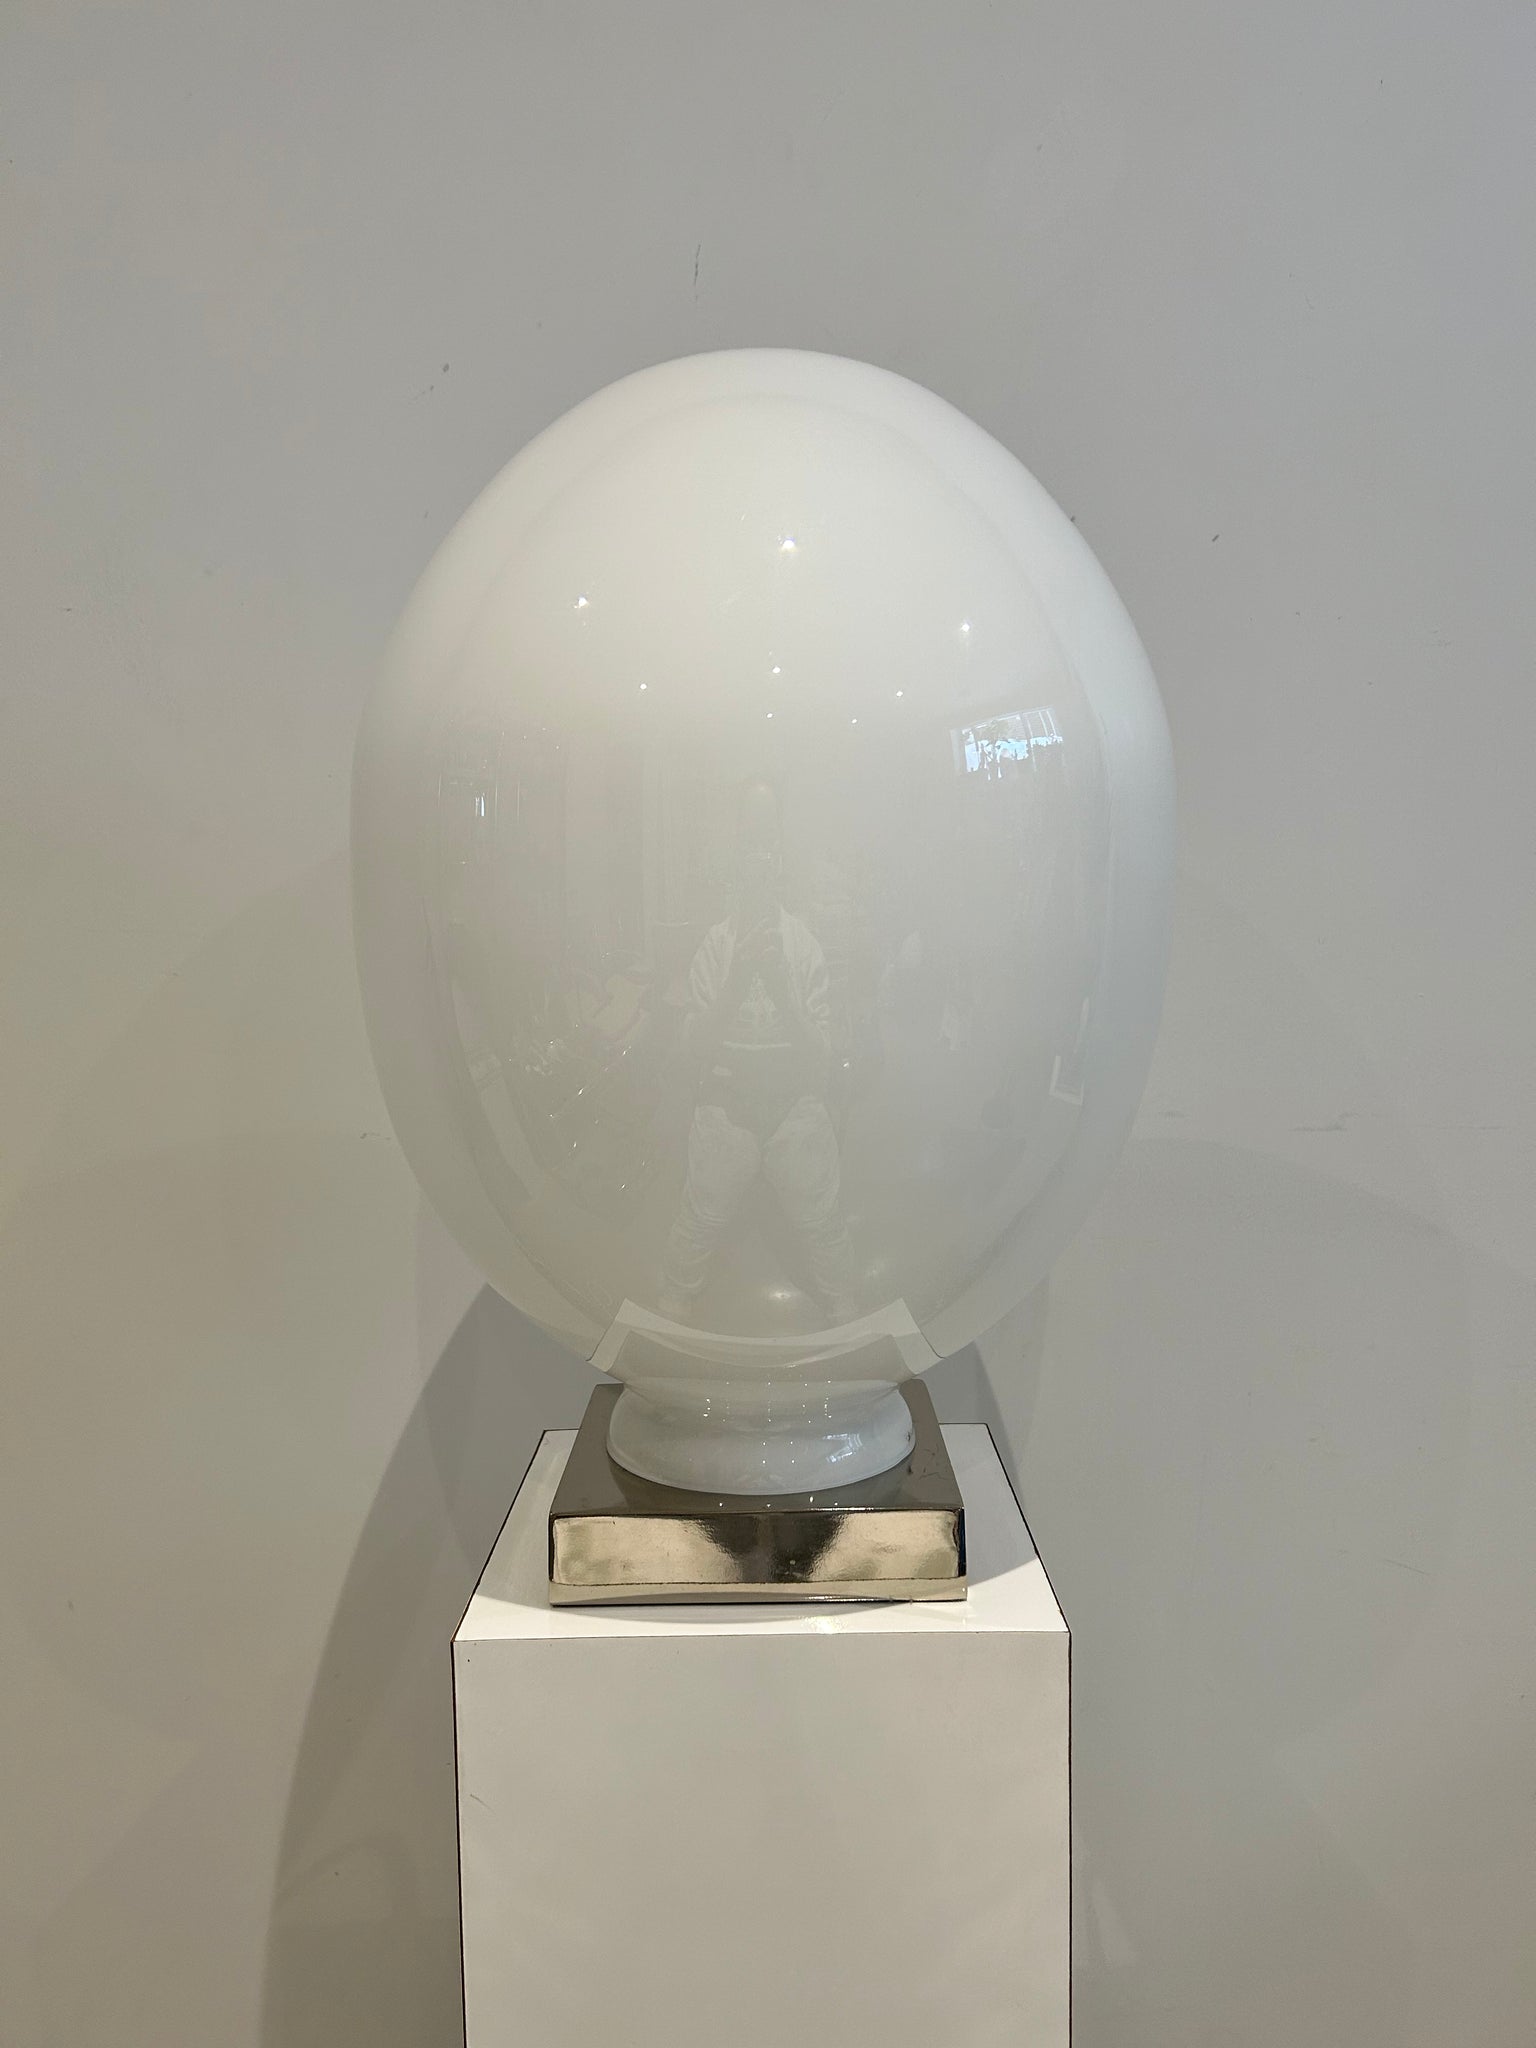 XL white Murano glass style egg lamps